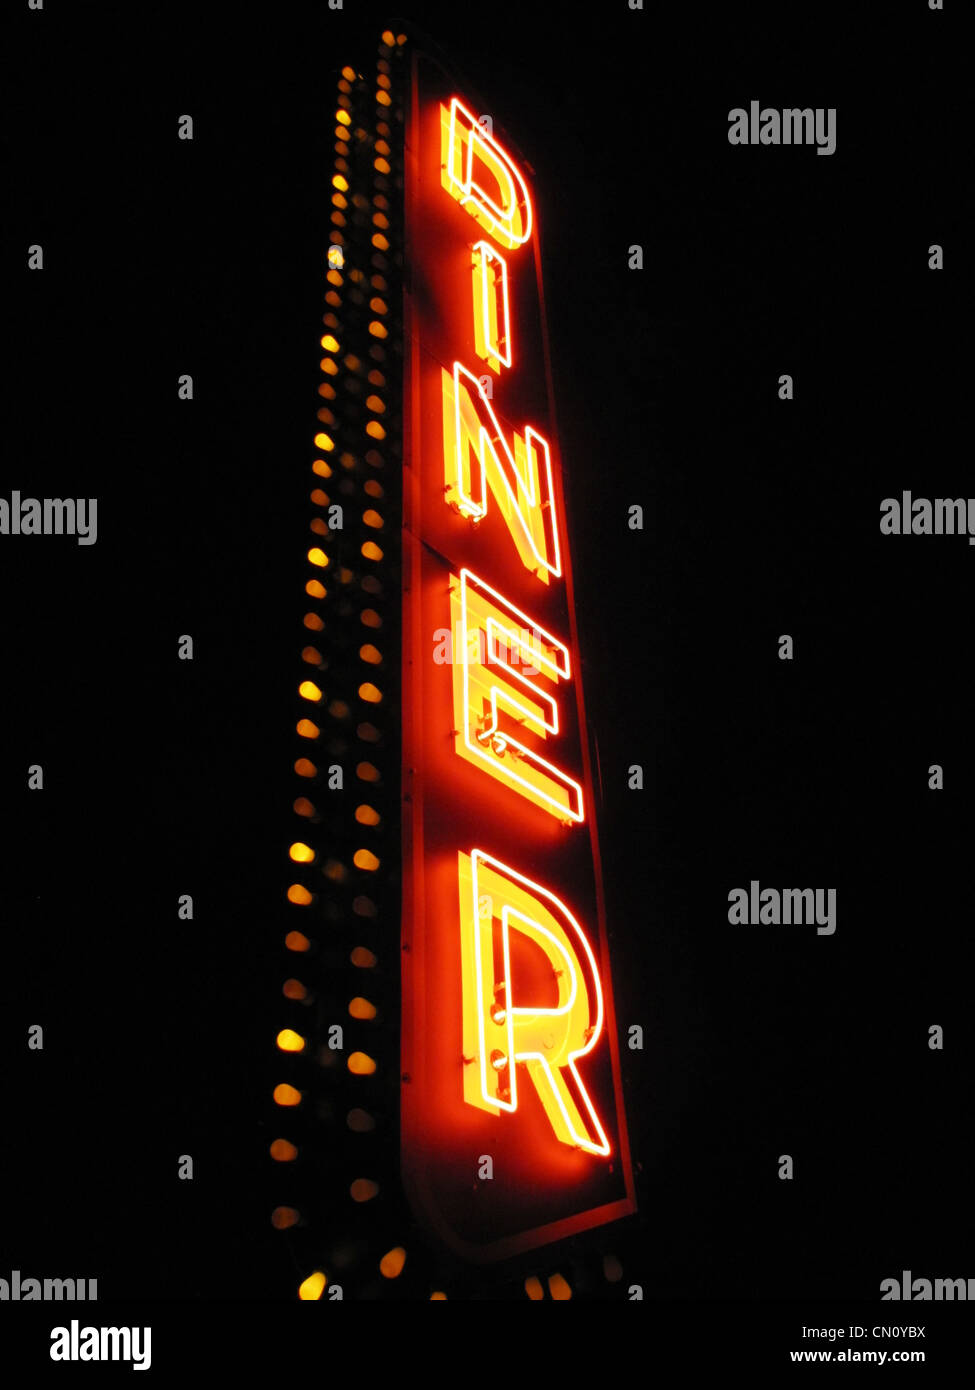 A large neon sign says 'DINER' against a black night sky. Stock Photo